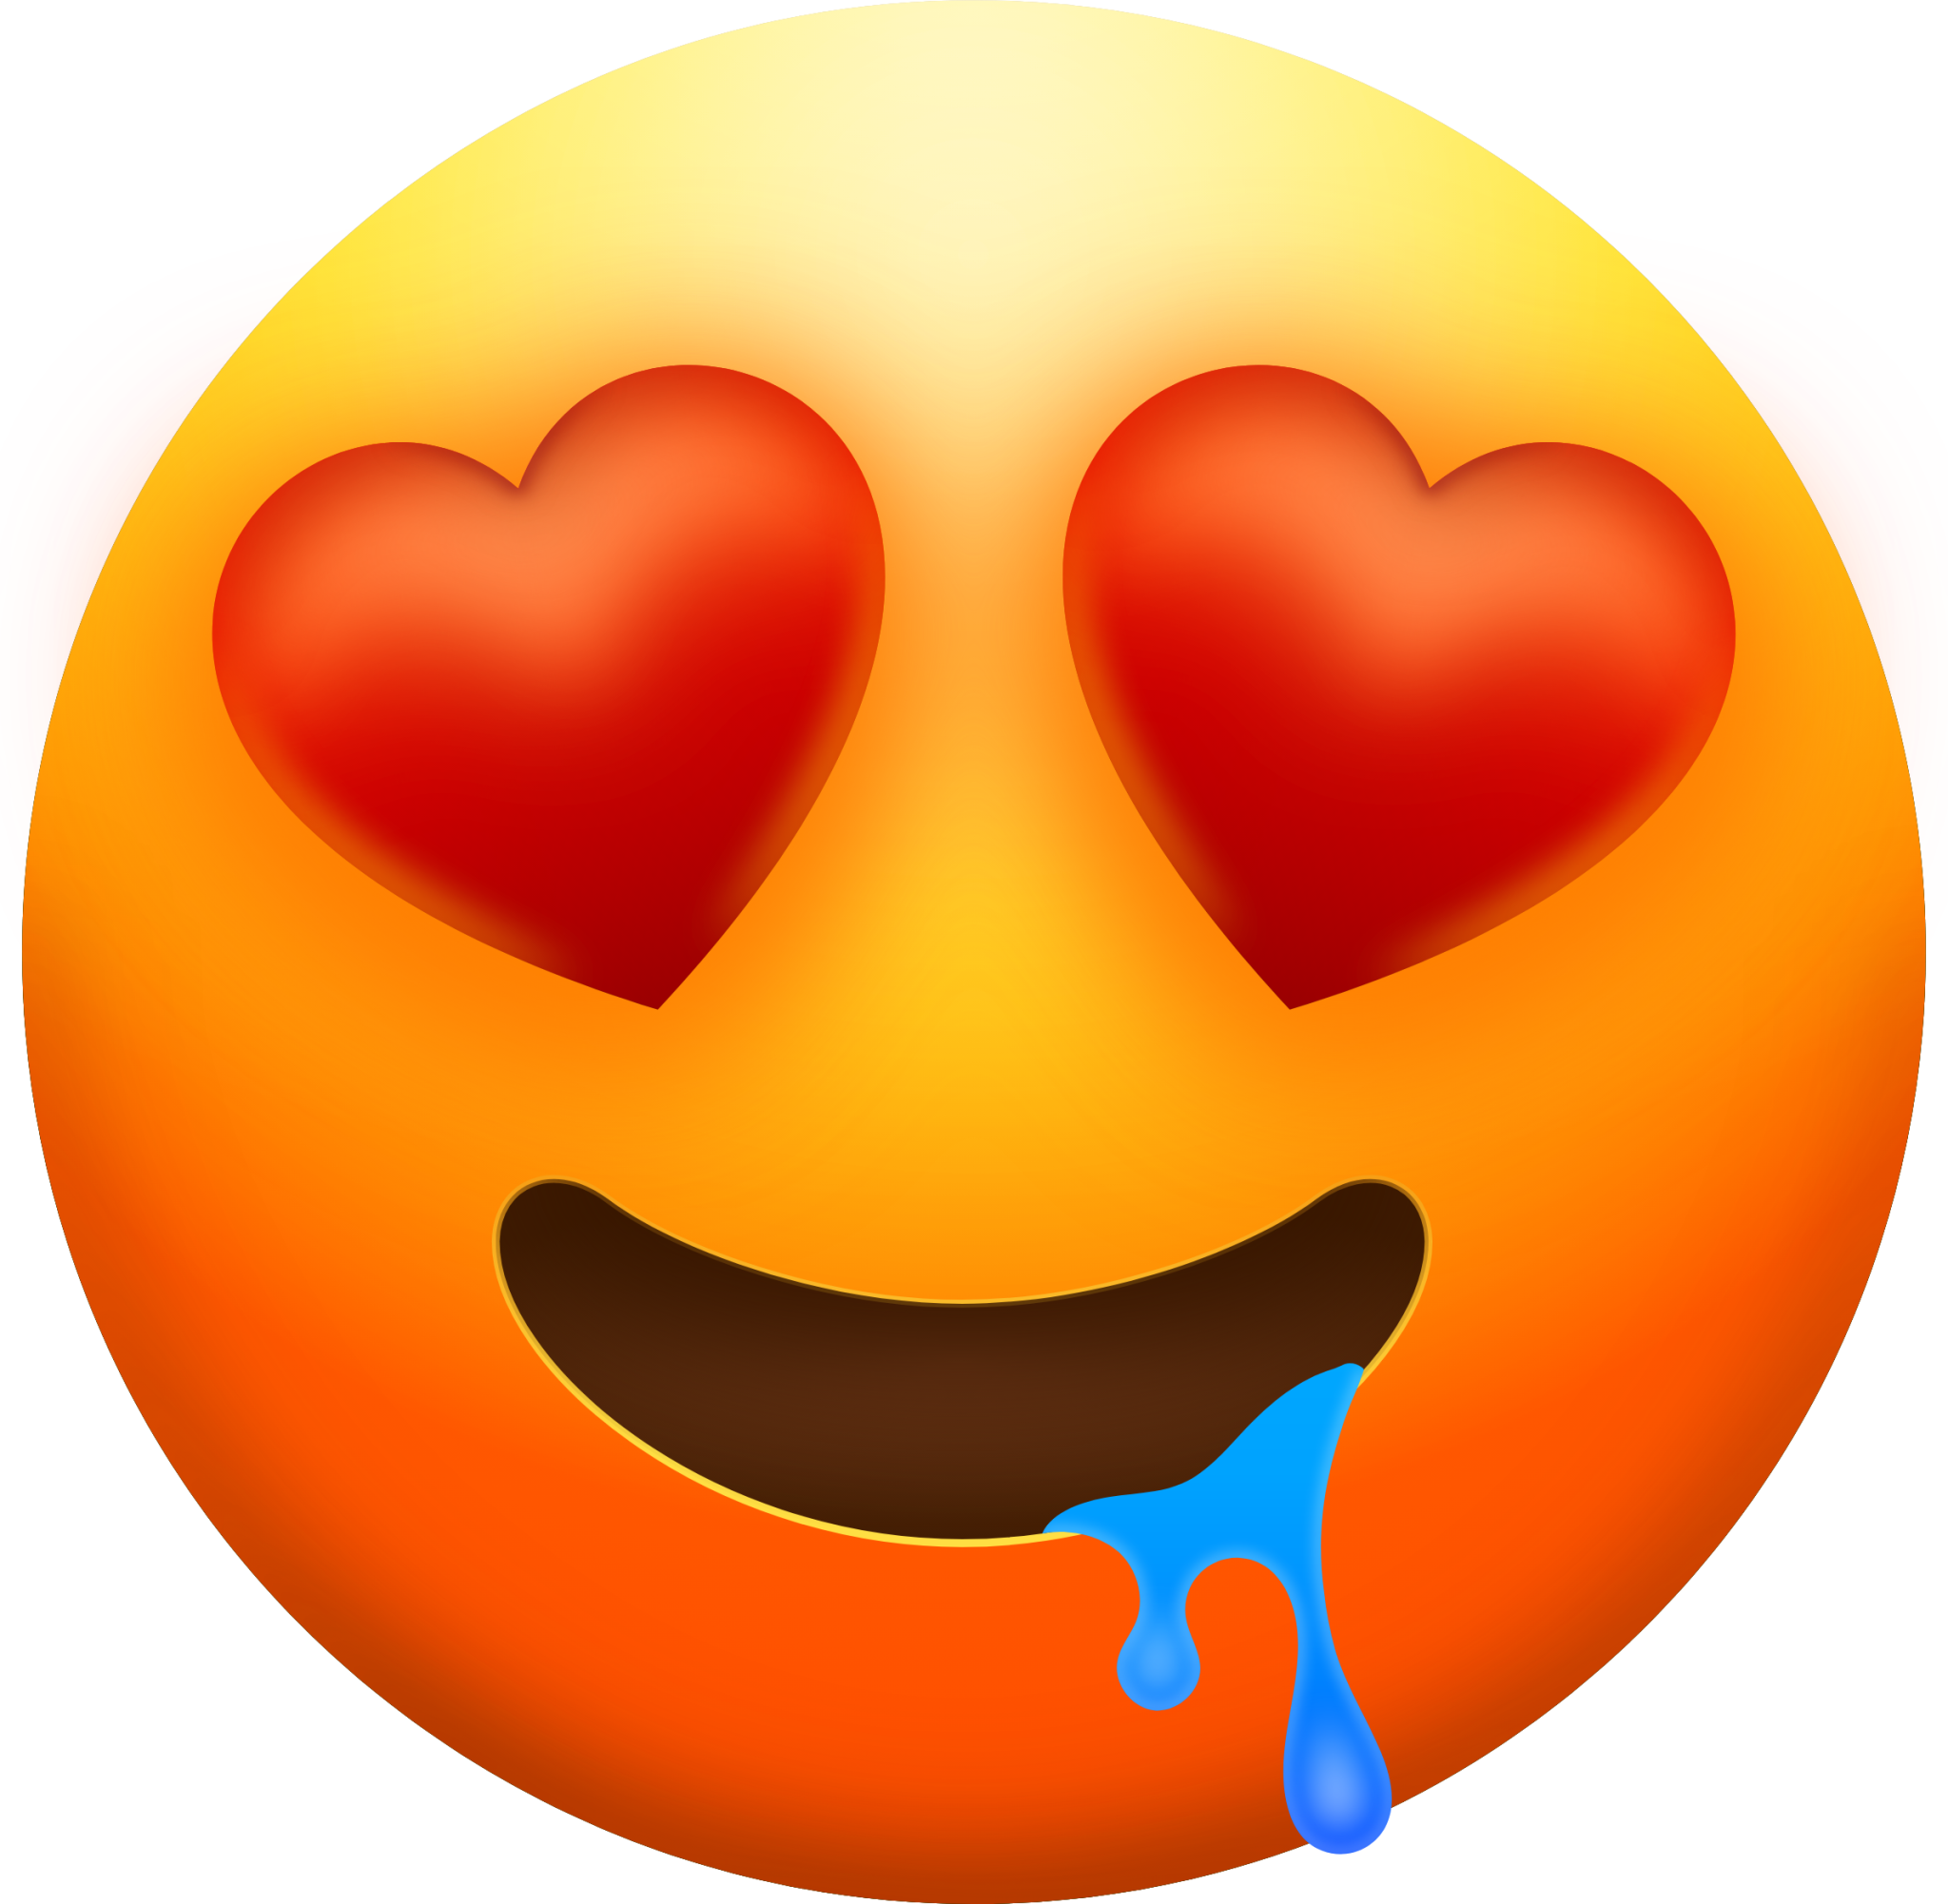 Drooling Face with Heart Eyes Emoji - Download for free – Iconduck